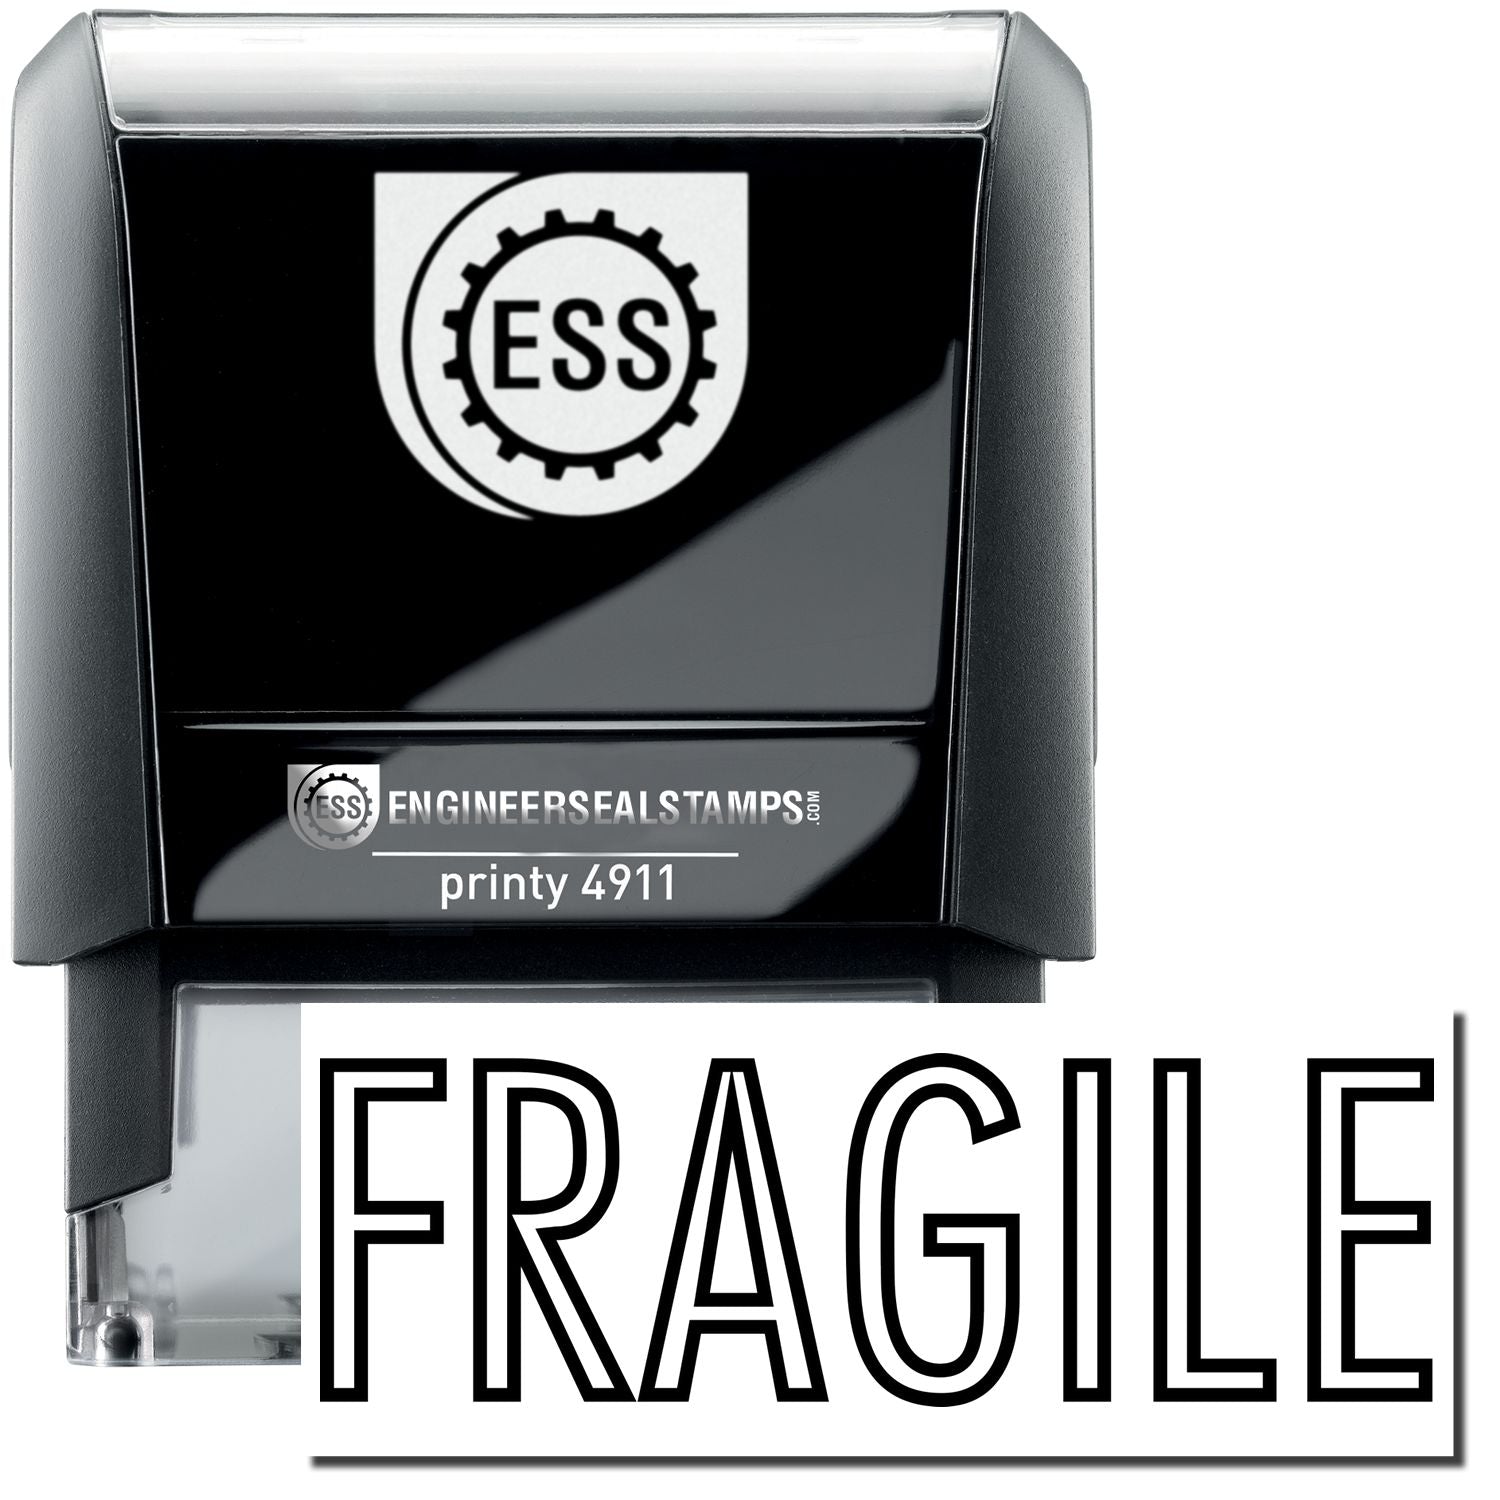 A self-inking stamp with a stamped image showing how the text "FRAGILE" in an outline style is displayed after stamping.